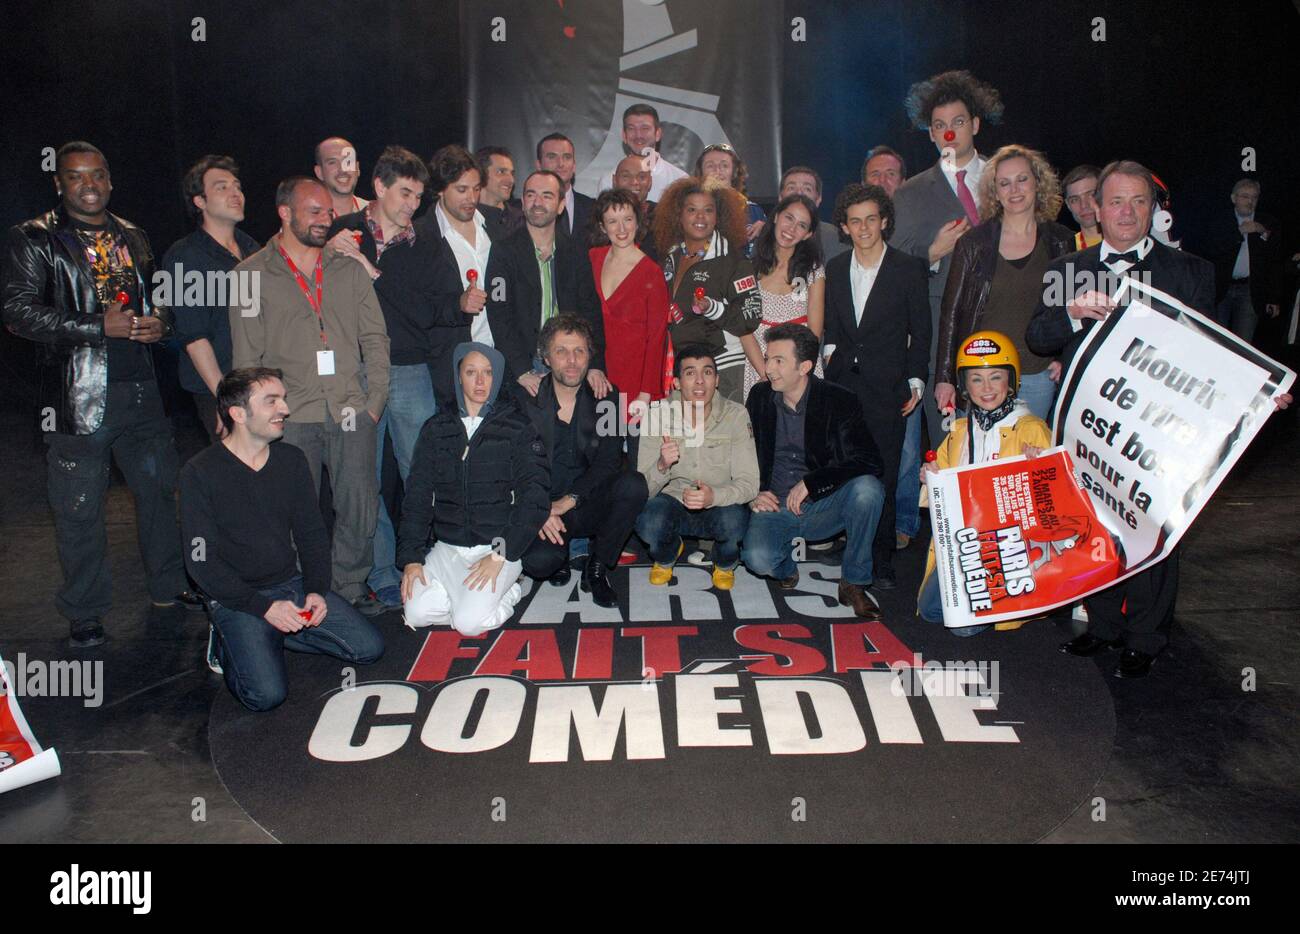 Some of the performers of 'Paris Fait sa Comedie' humor festival, including  Bruno Solo, Anthony Kavanagh, Anne Roumanoff, Stephane Guillon, Denis  Marechal, Bruno Salomone, Gerald Dahan, Michele Bernier pose for a group